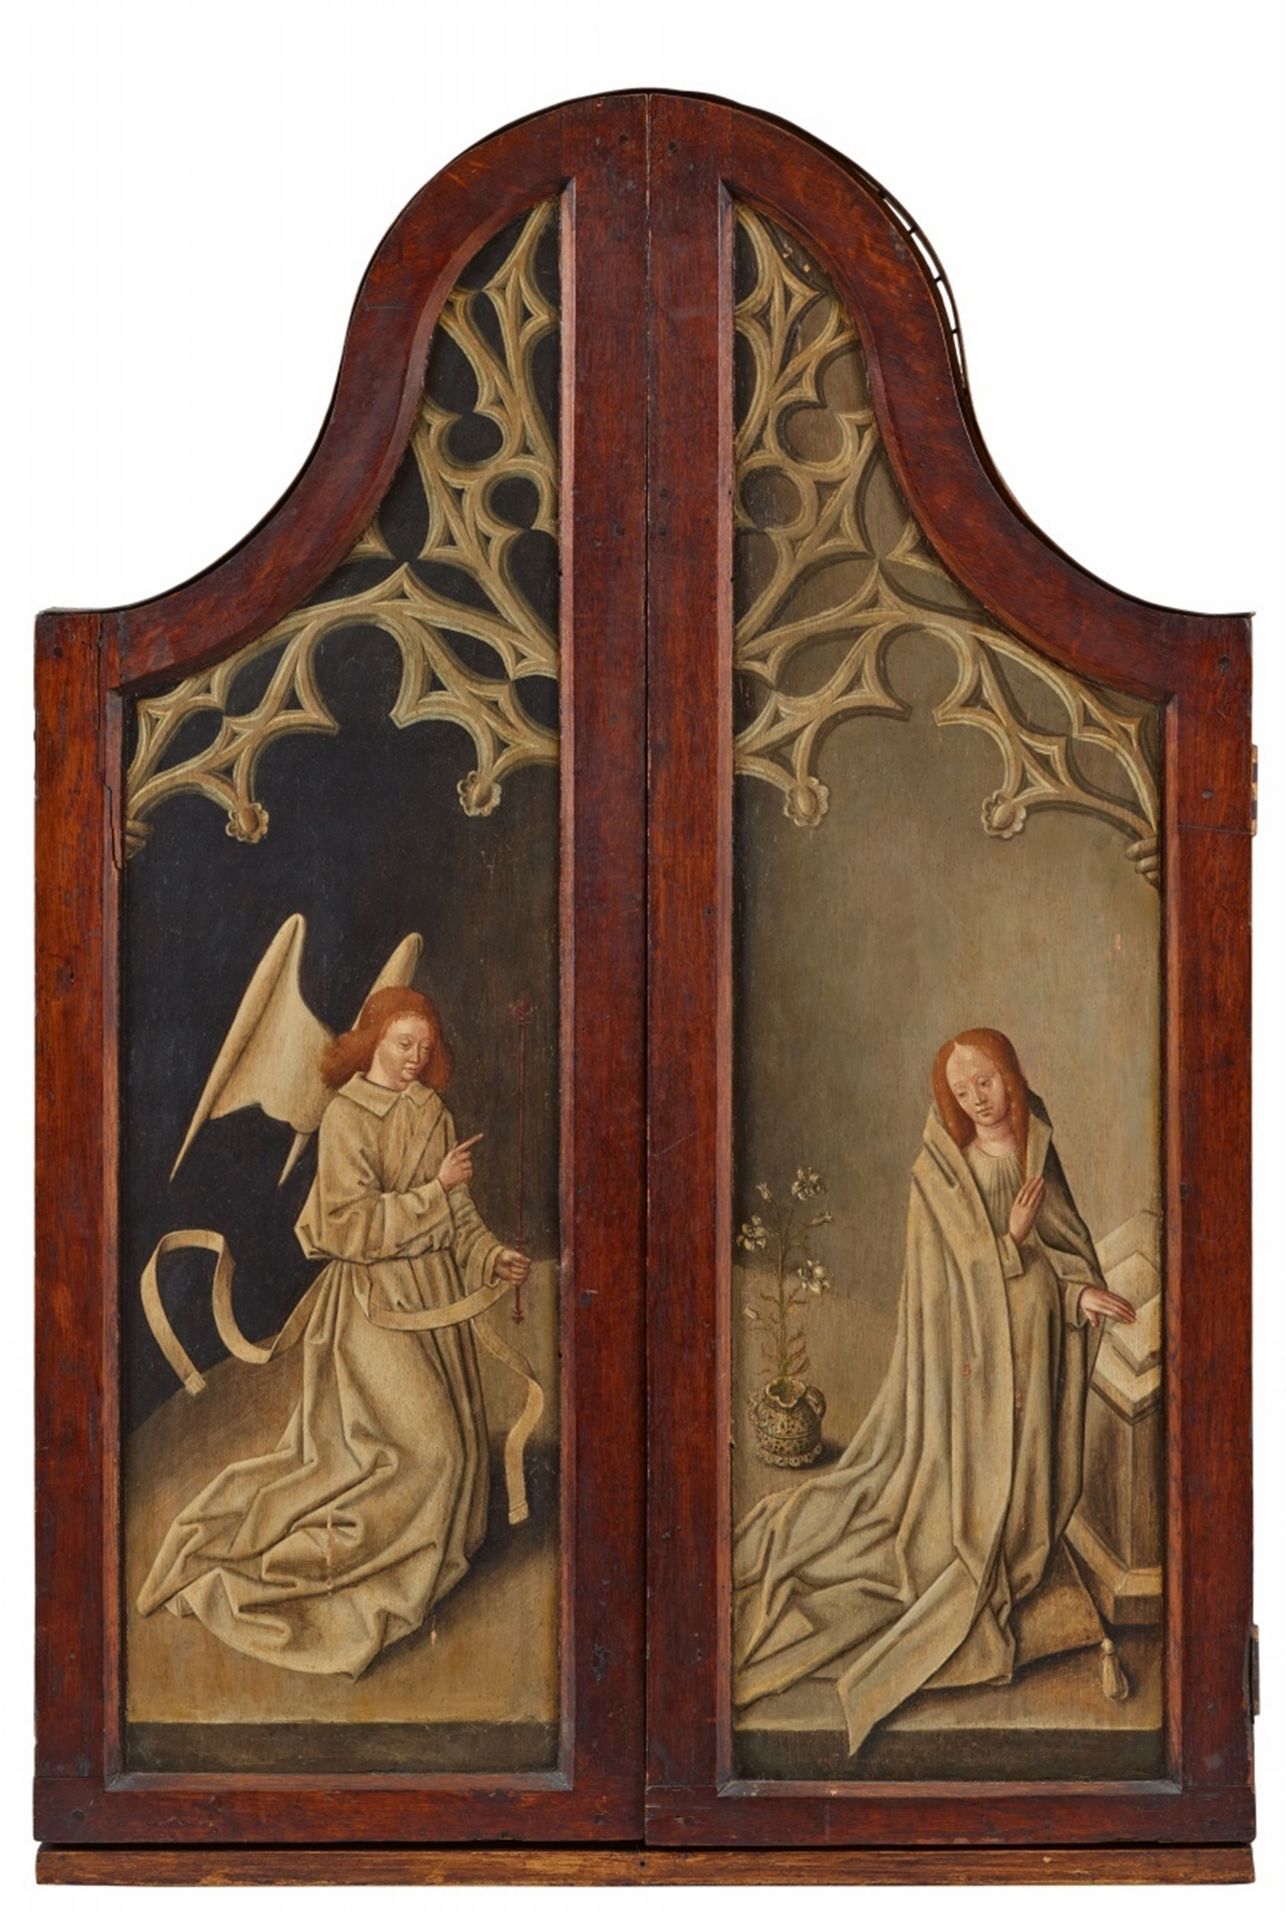 Bruges School around 1500<BR>Triptych with the Crucifixion, John the Baptist and St. Barbara - Image 2 of 2